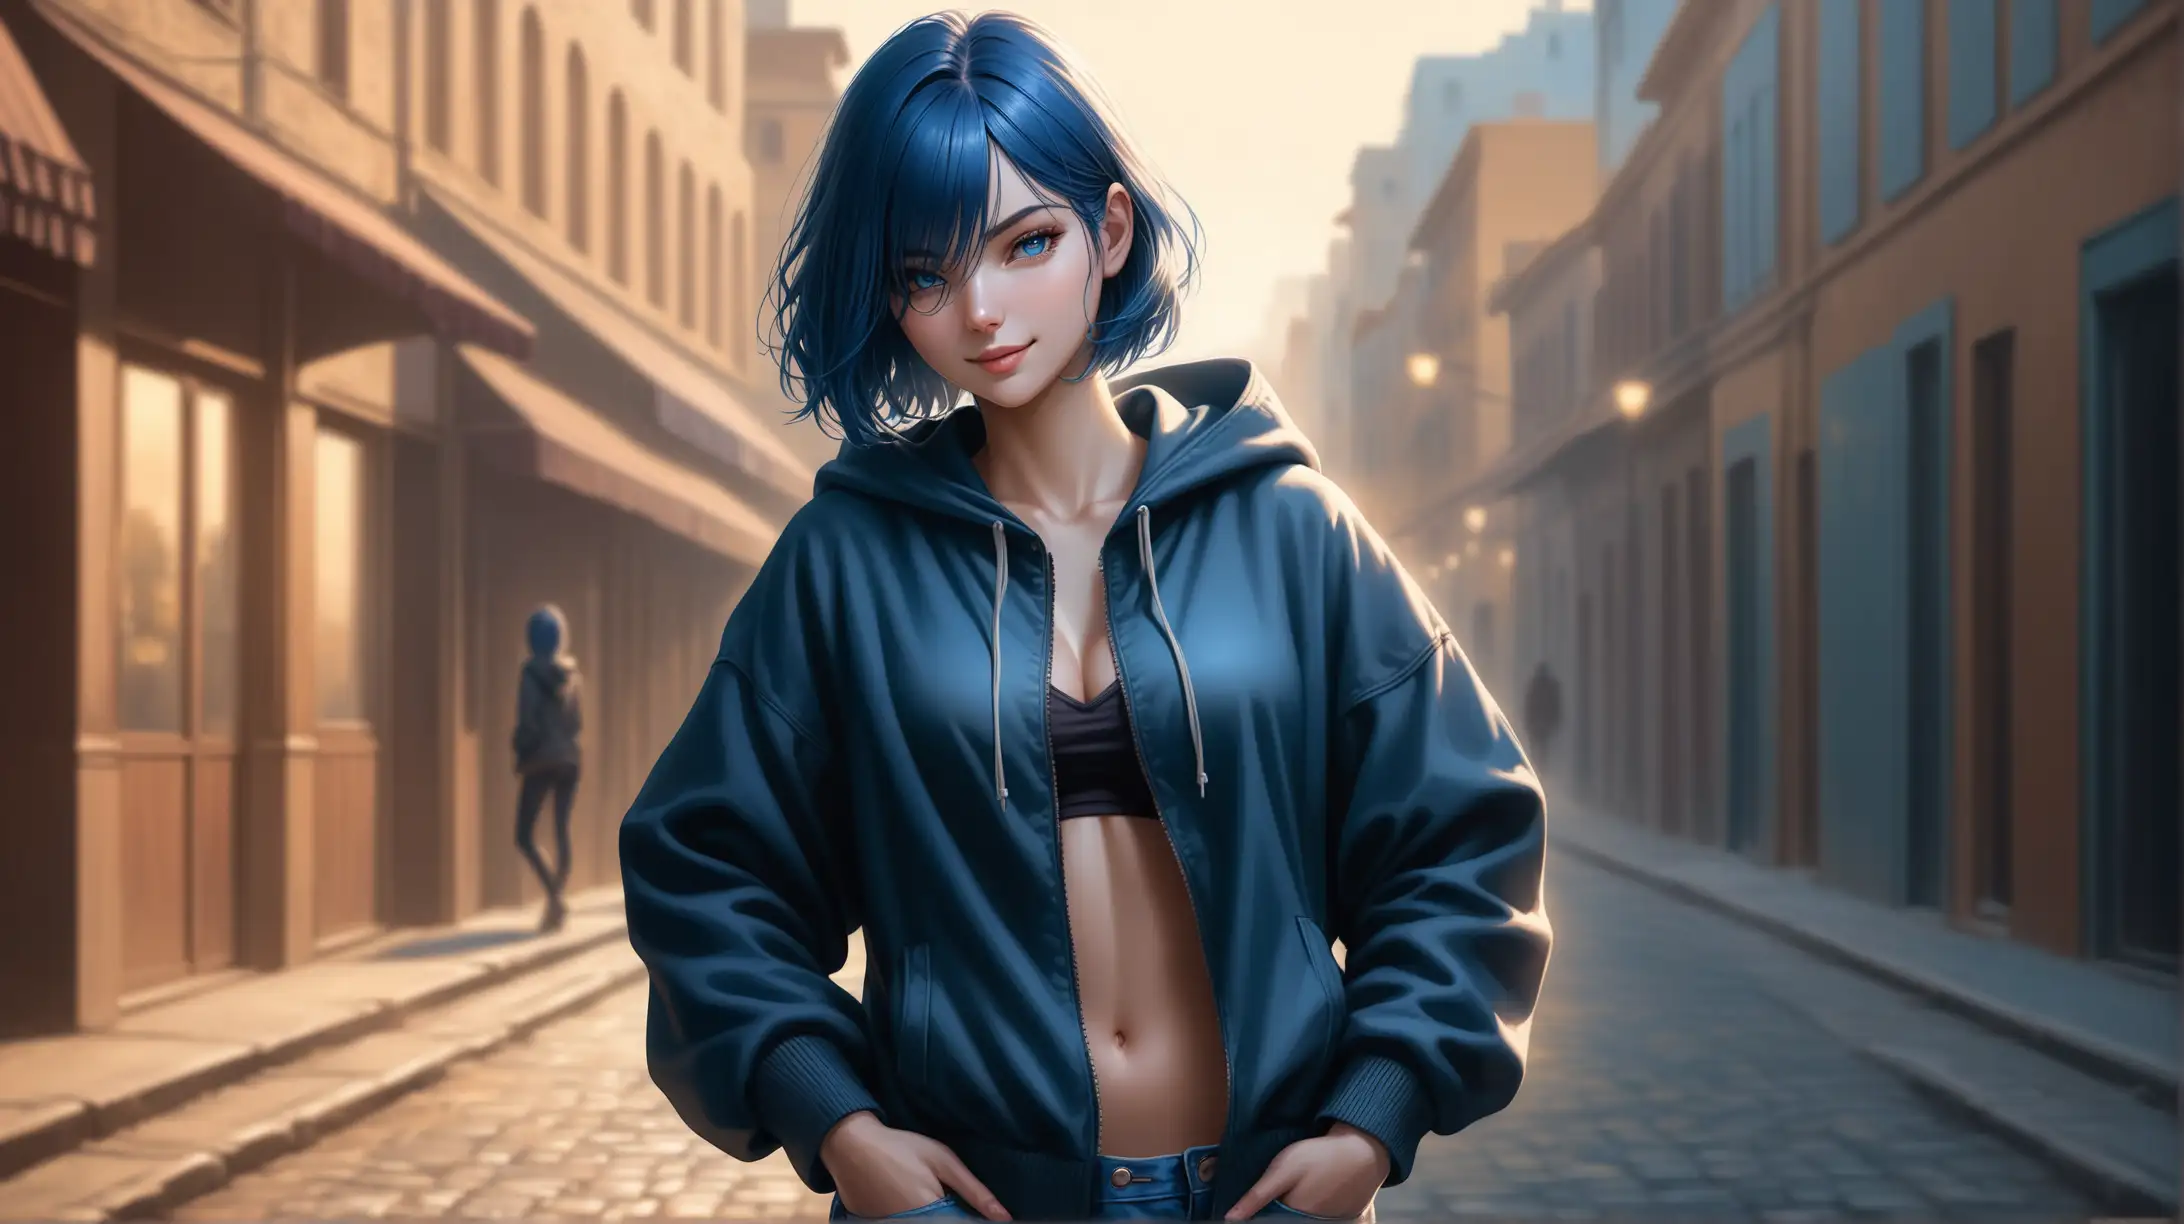 Seductive Woman with Short Blue Hair in Ambient Outdoor Lighting